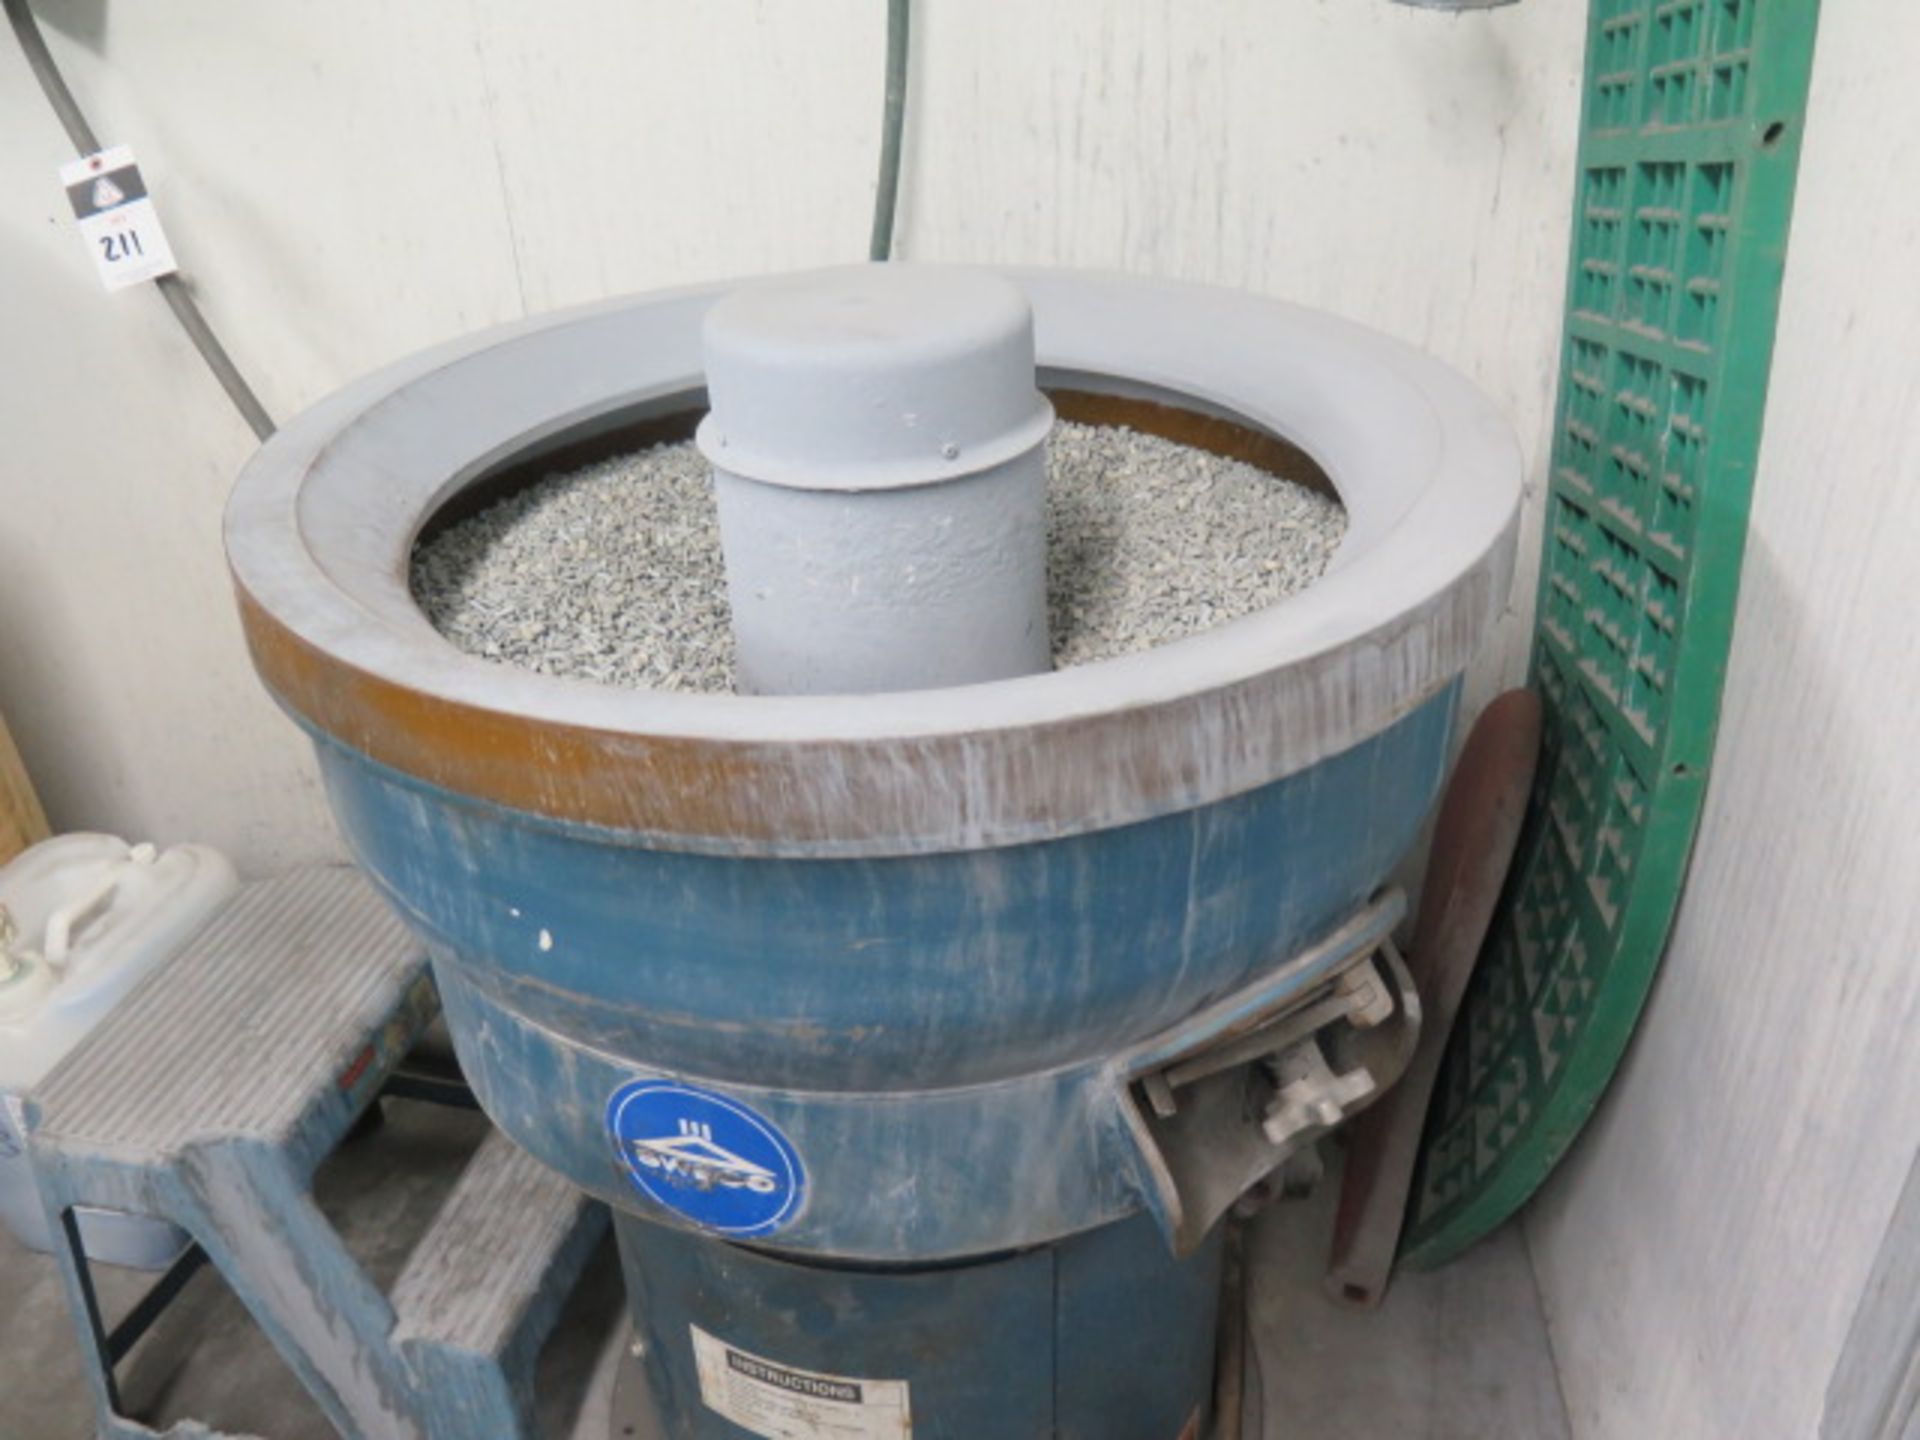 Sweco FM-3C "Vibro Energy Finishing Mill" Media Tumbler s/n 503793-4395 (SOLD AS-IS - NO WARRANTY) - Image 2 of 8